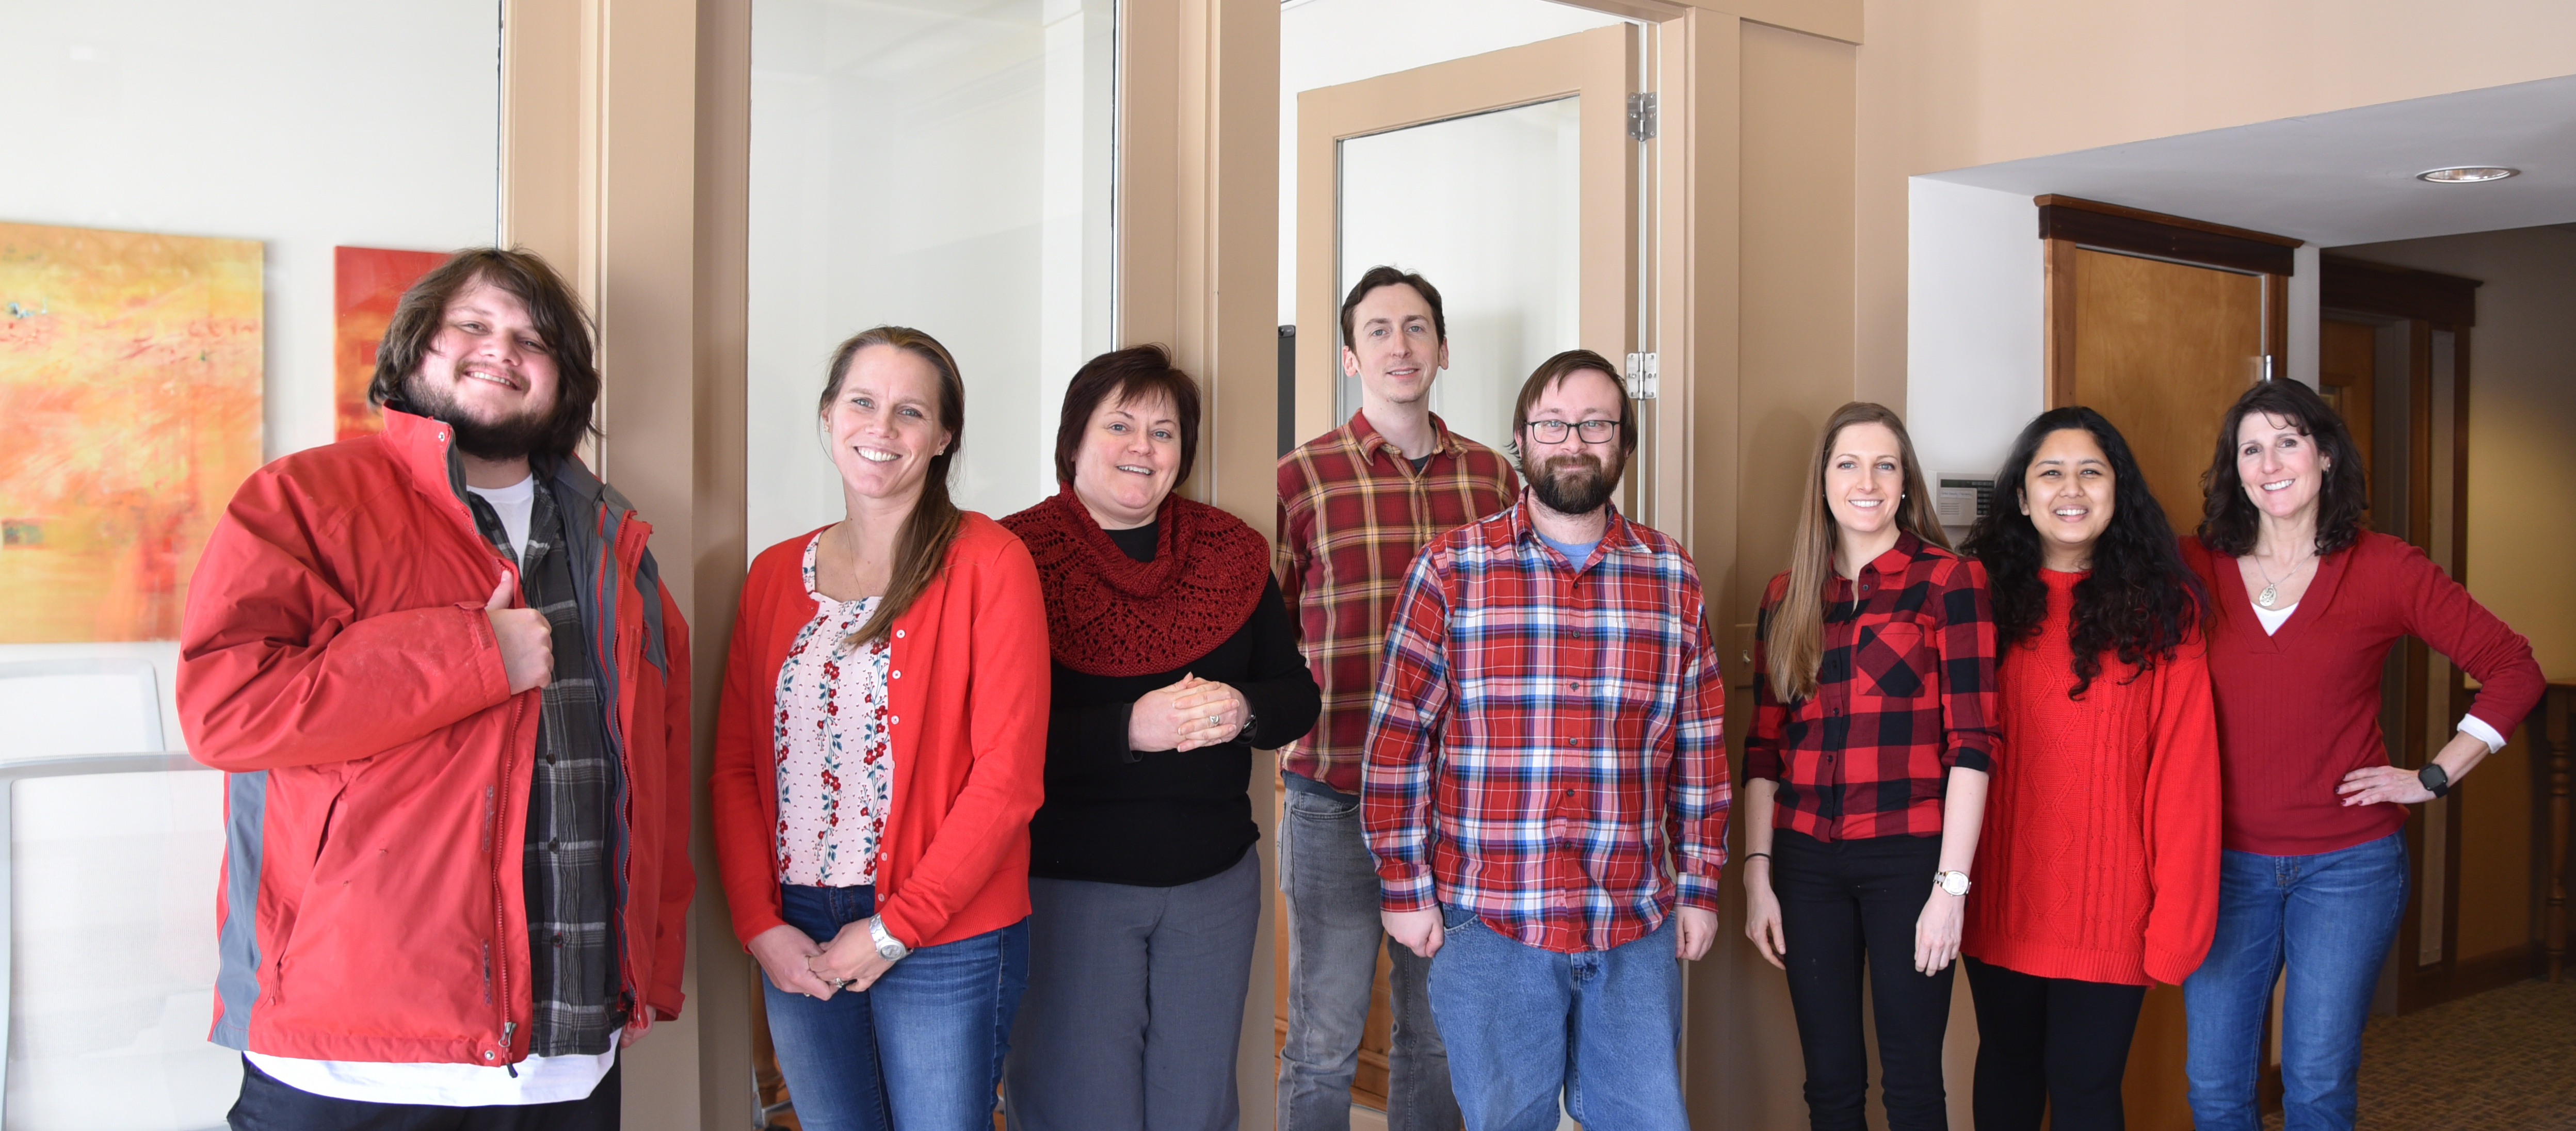 E4H Vermont employees wearing red shirts in office